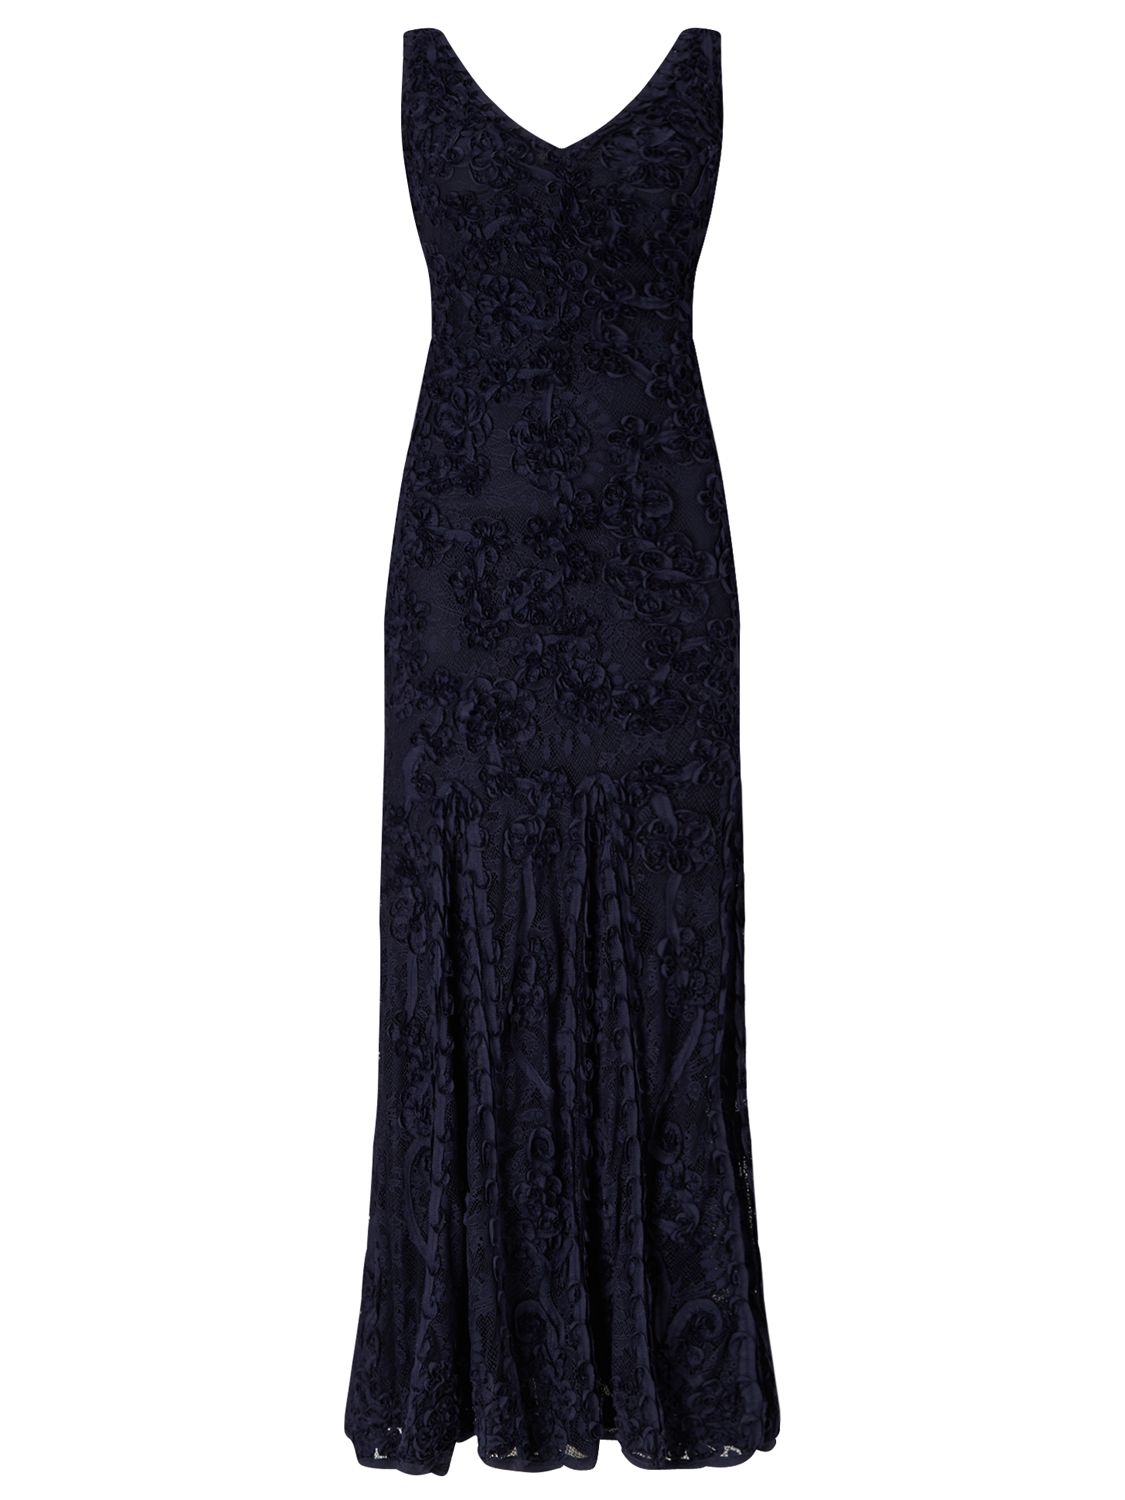 Phase Eight Collection 8 Rosa Tapework Full Length Dress, Navy